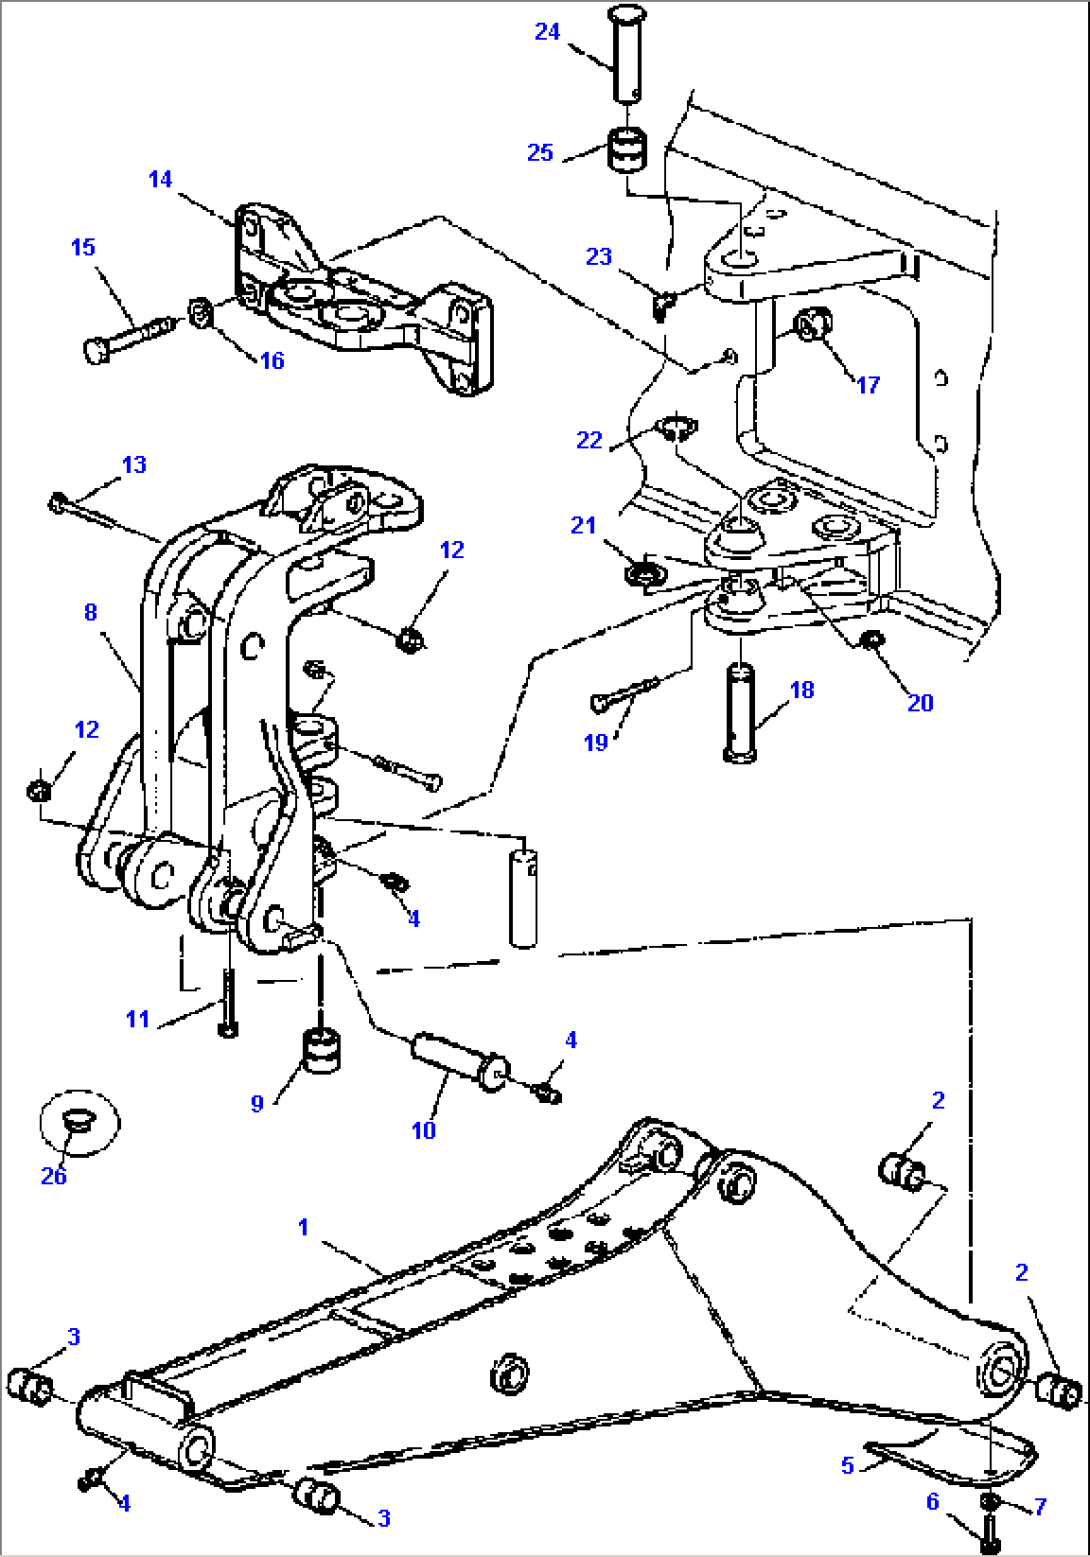 FIG. T7220-01A0 BRACKET AND BOOM